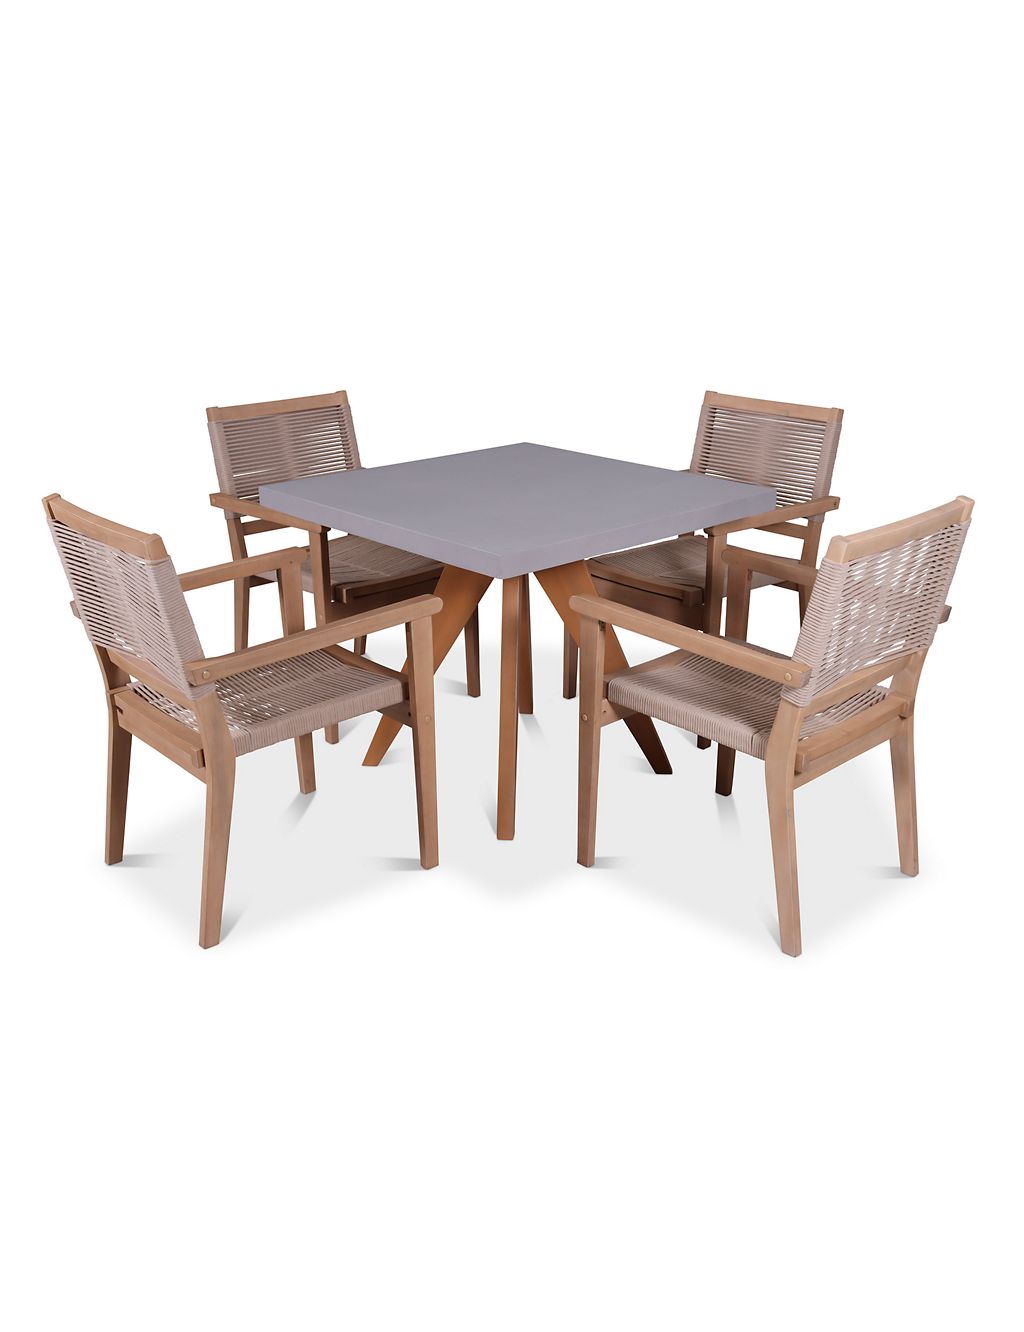 Luna 4 Seater Garden Table & Chairs 5 of 5